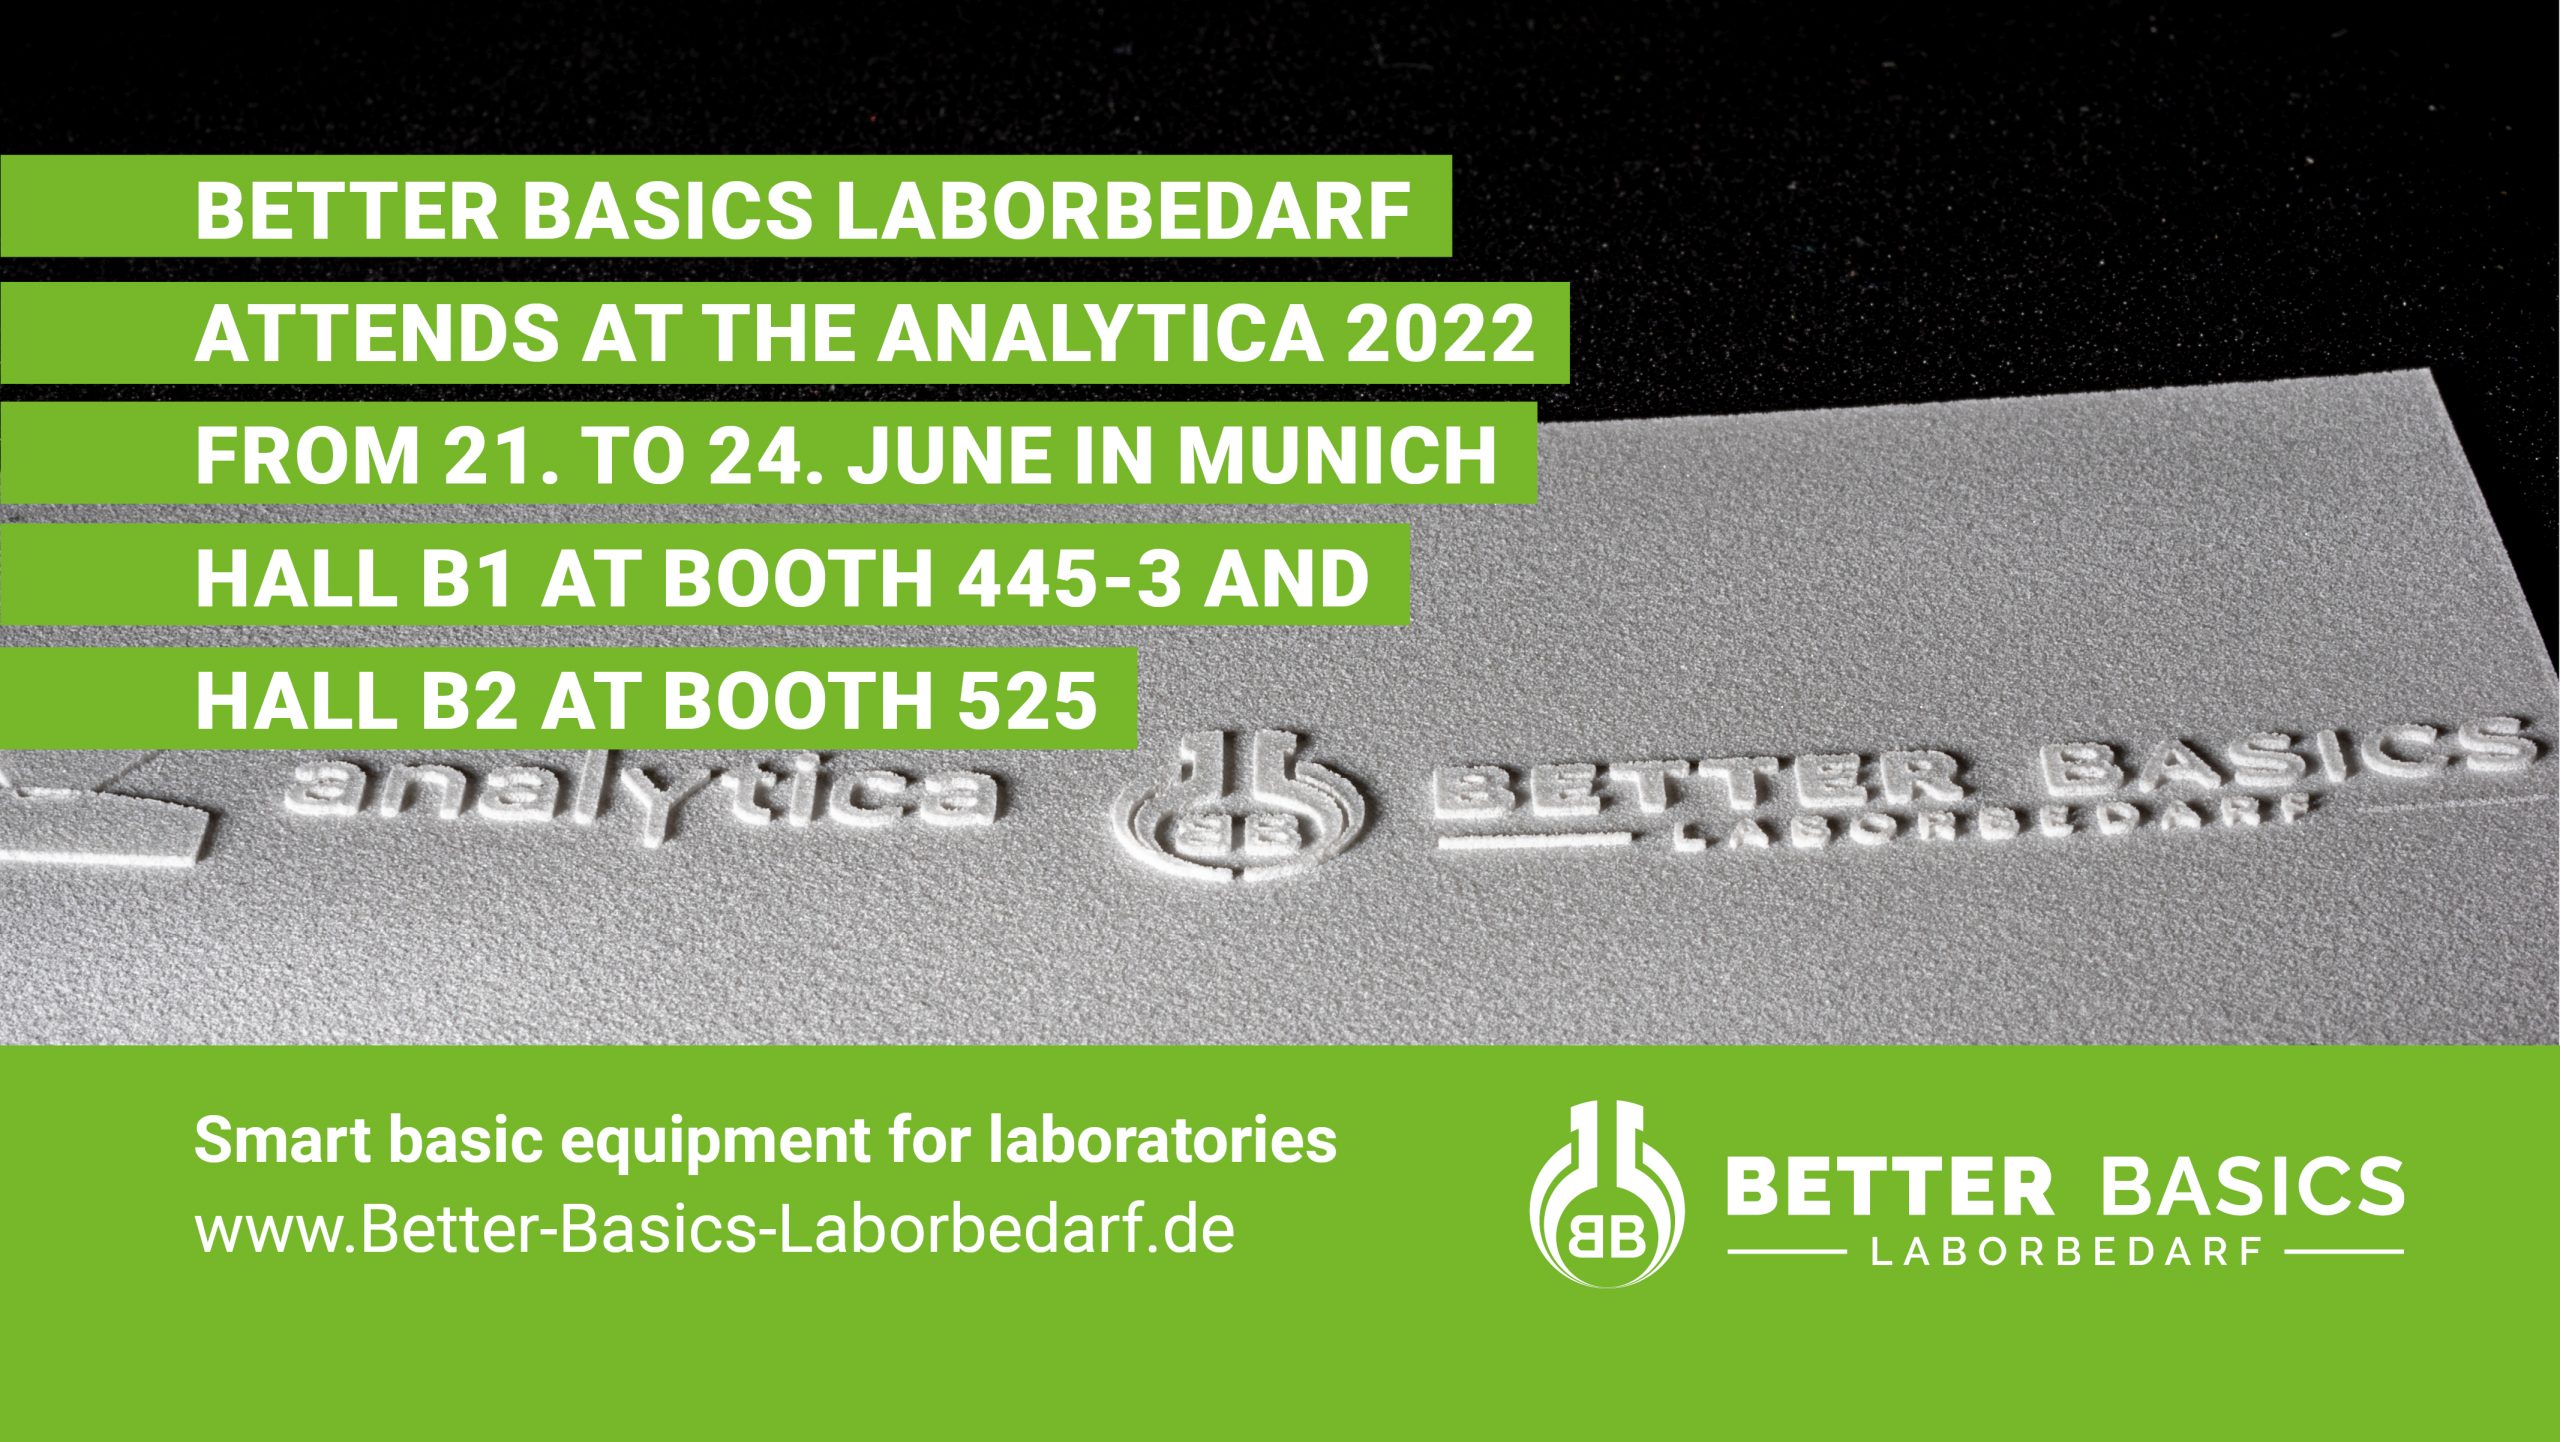 Better Basics Laborbedarf attends from 21.-24. June 2022 at the Analytica, the world's leading trade fair for laboratory technology, analytics and biotechnology.